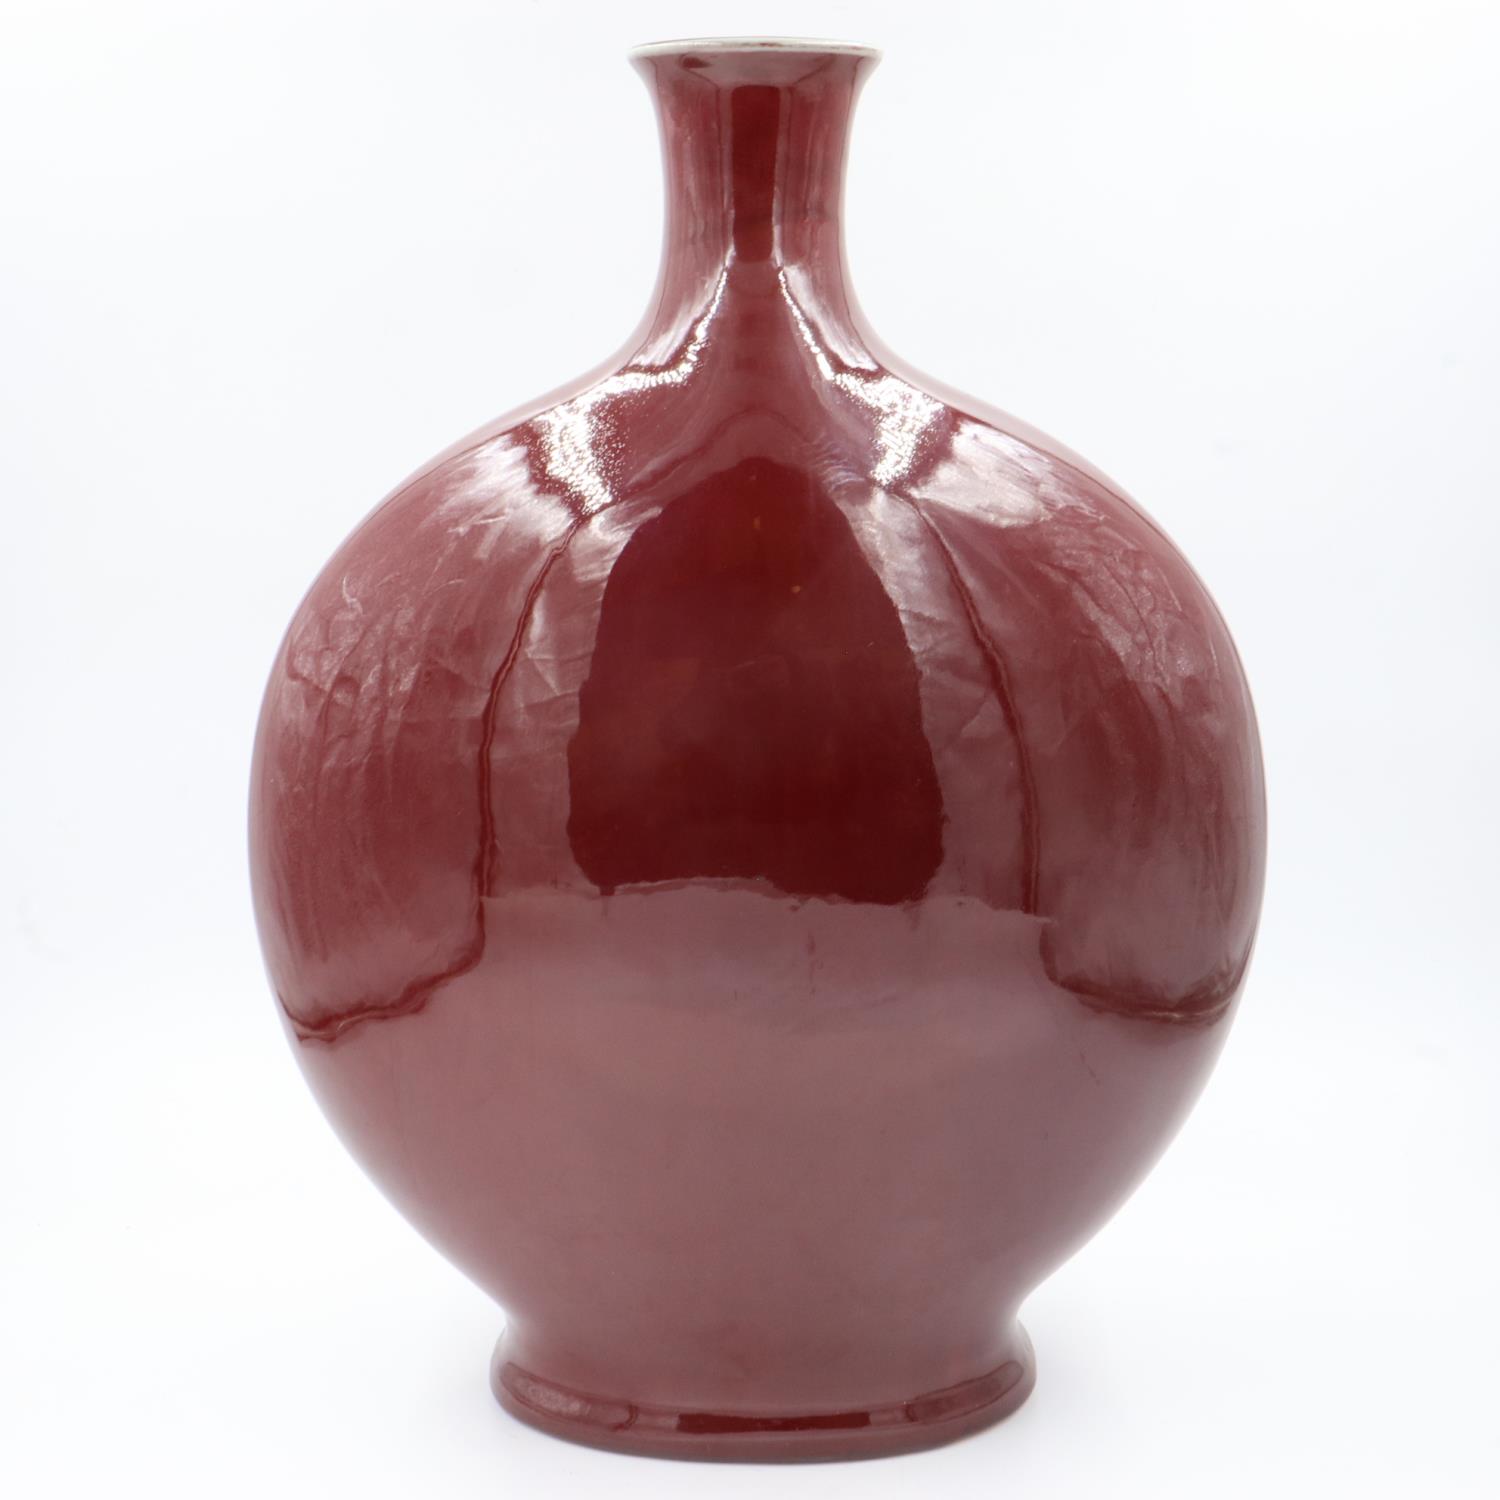 Oversized Sang De Boeuf ceramic moon flask, H: 61 cm. Not available for in-house P&P